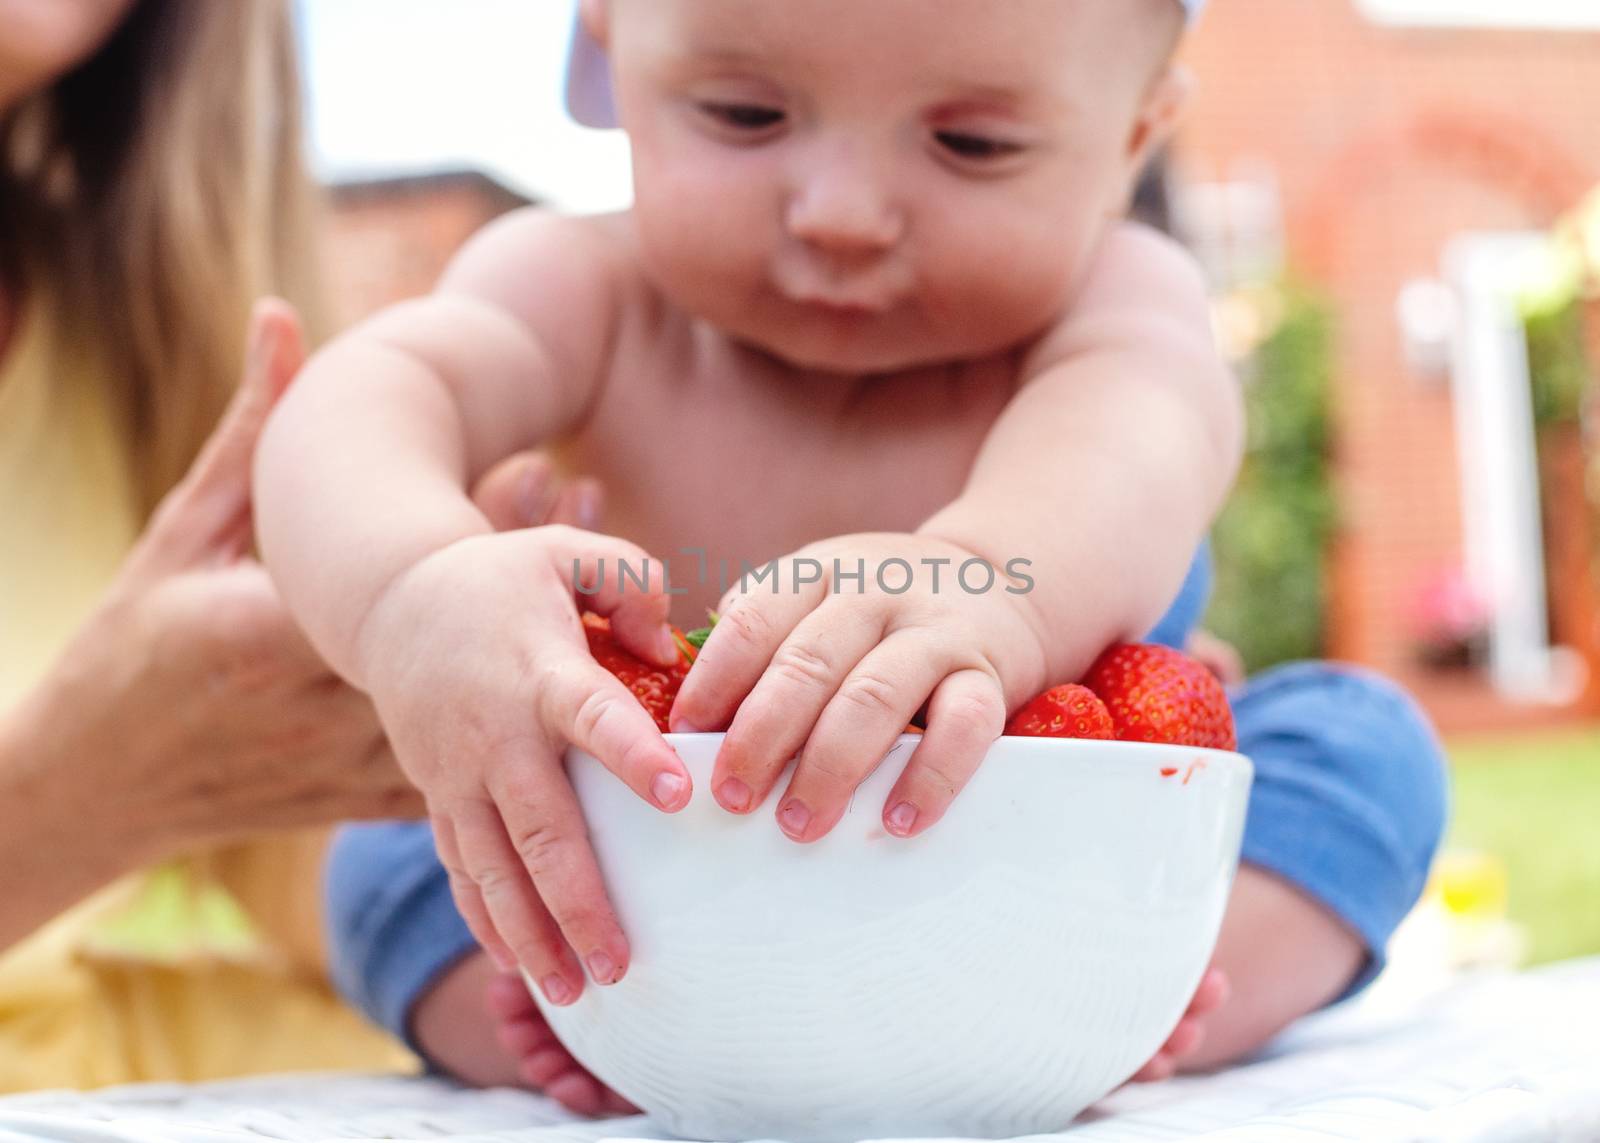 a child grabbing strawberries from a bowl